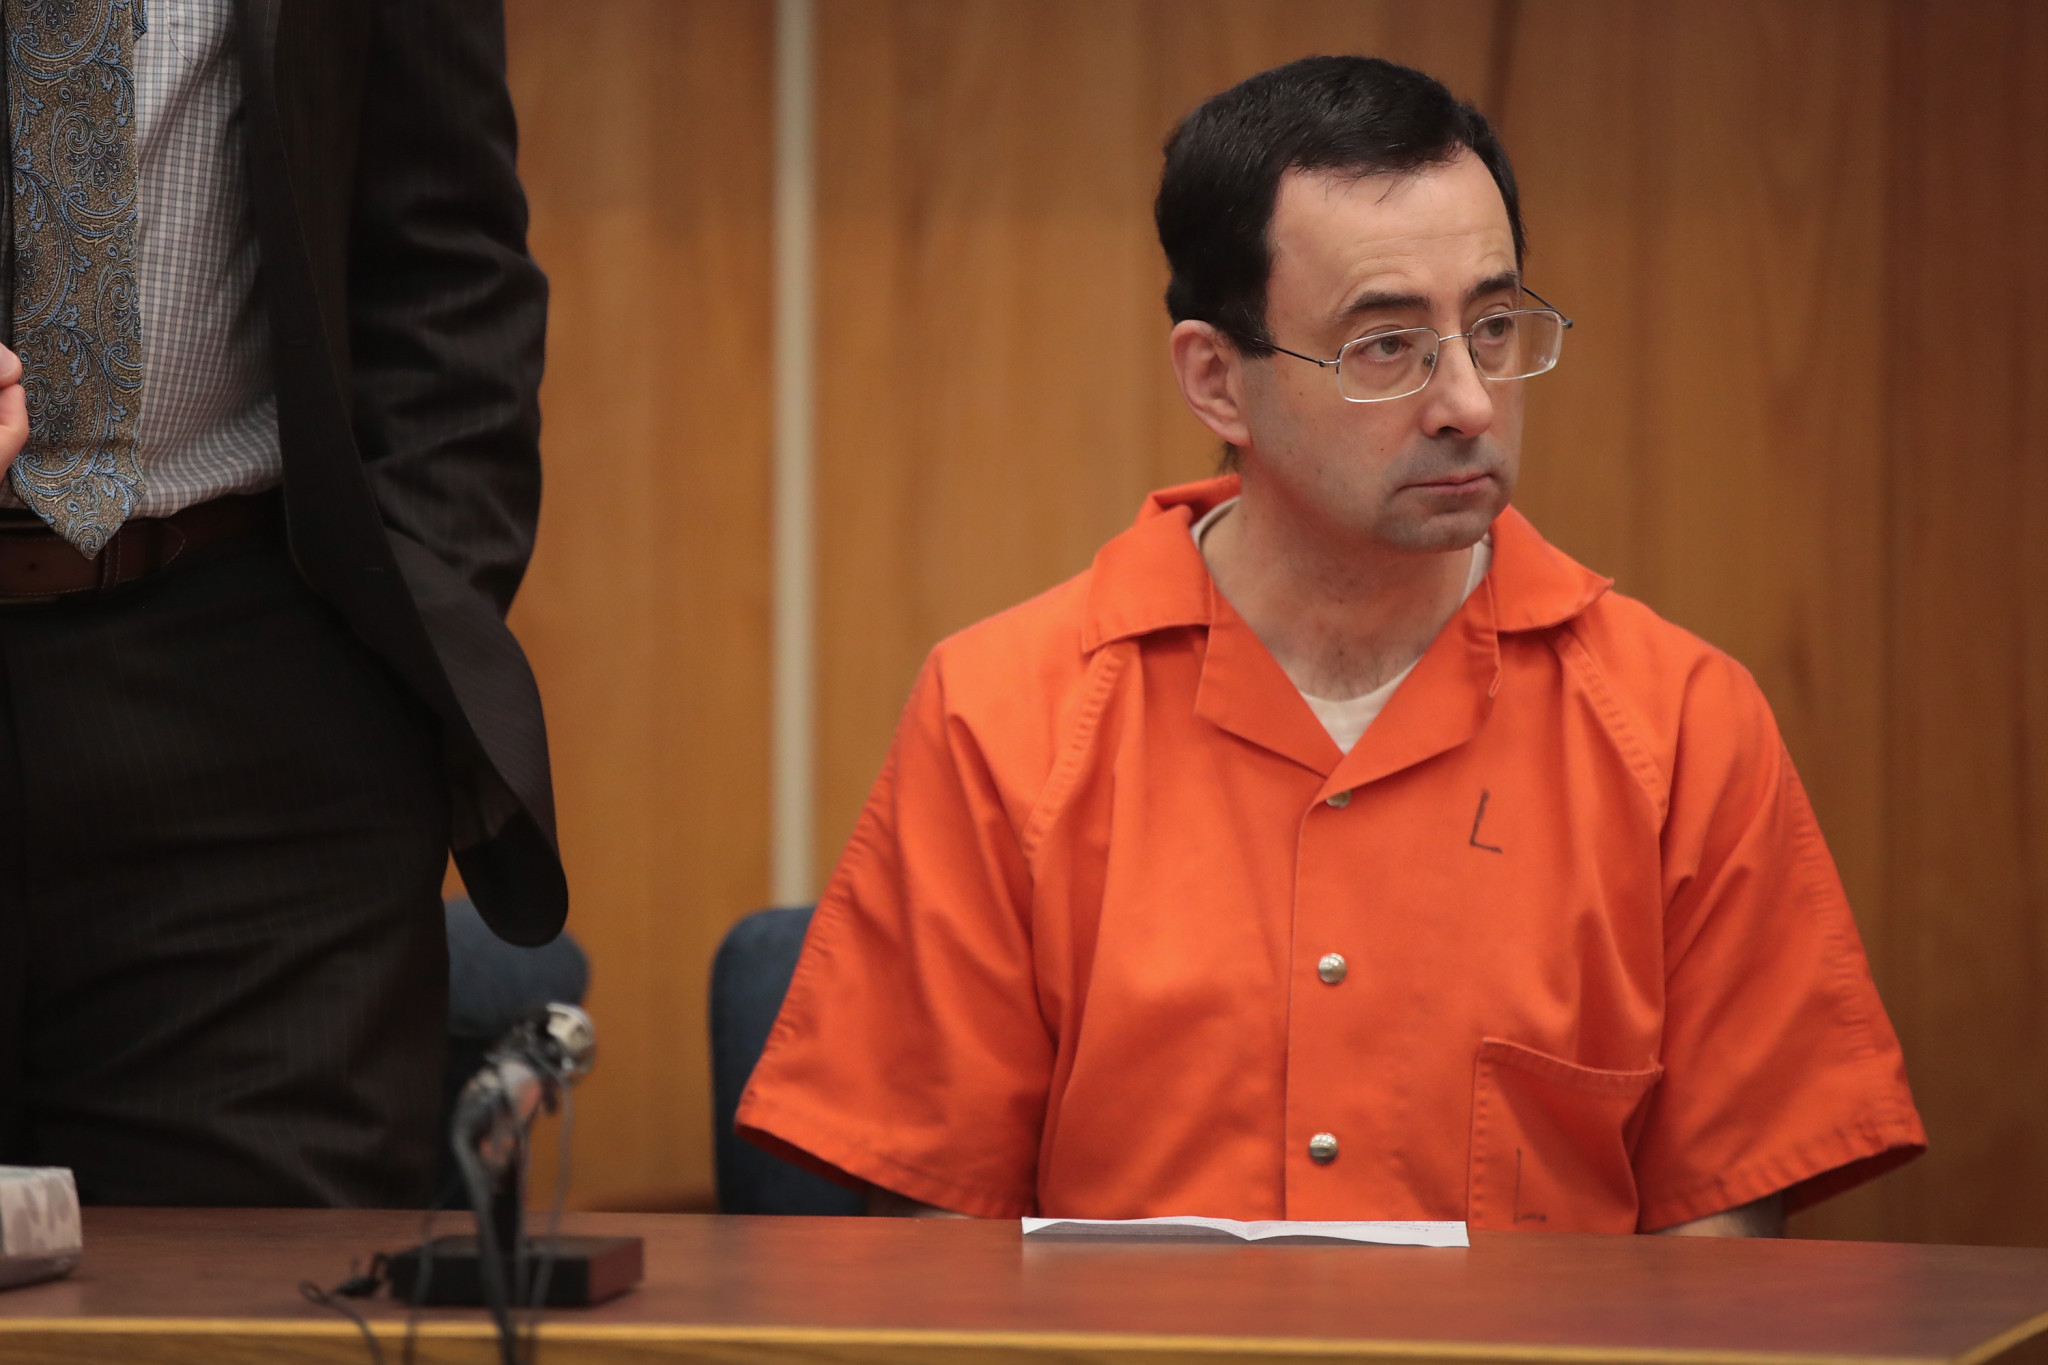 Approximately 200 women, including Olympic gold medal-winning gymnasts, gave statements against Larry Nassar at his hearings ©Getty Images